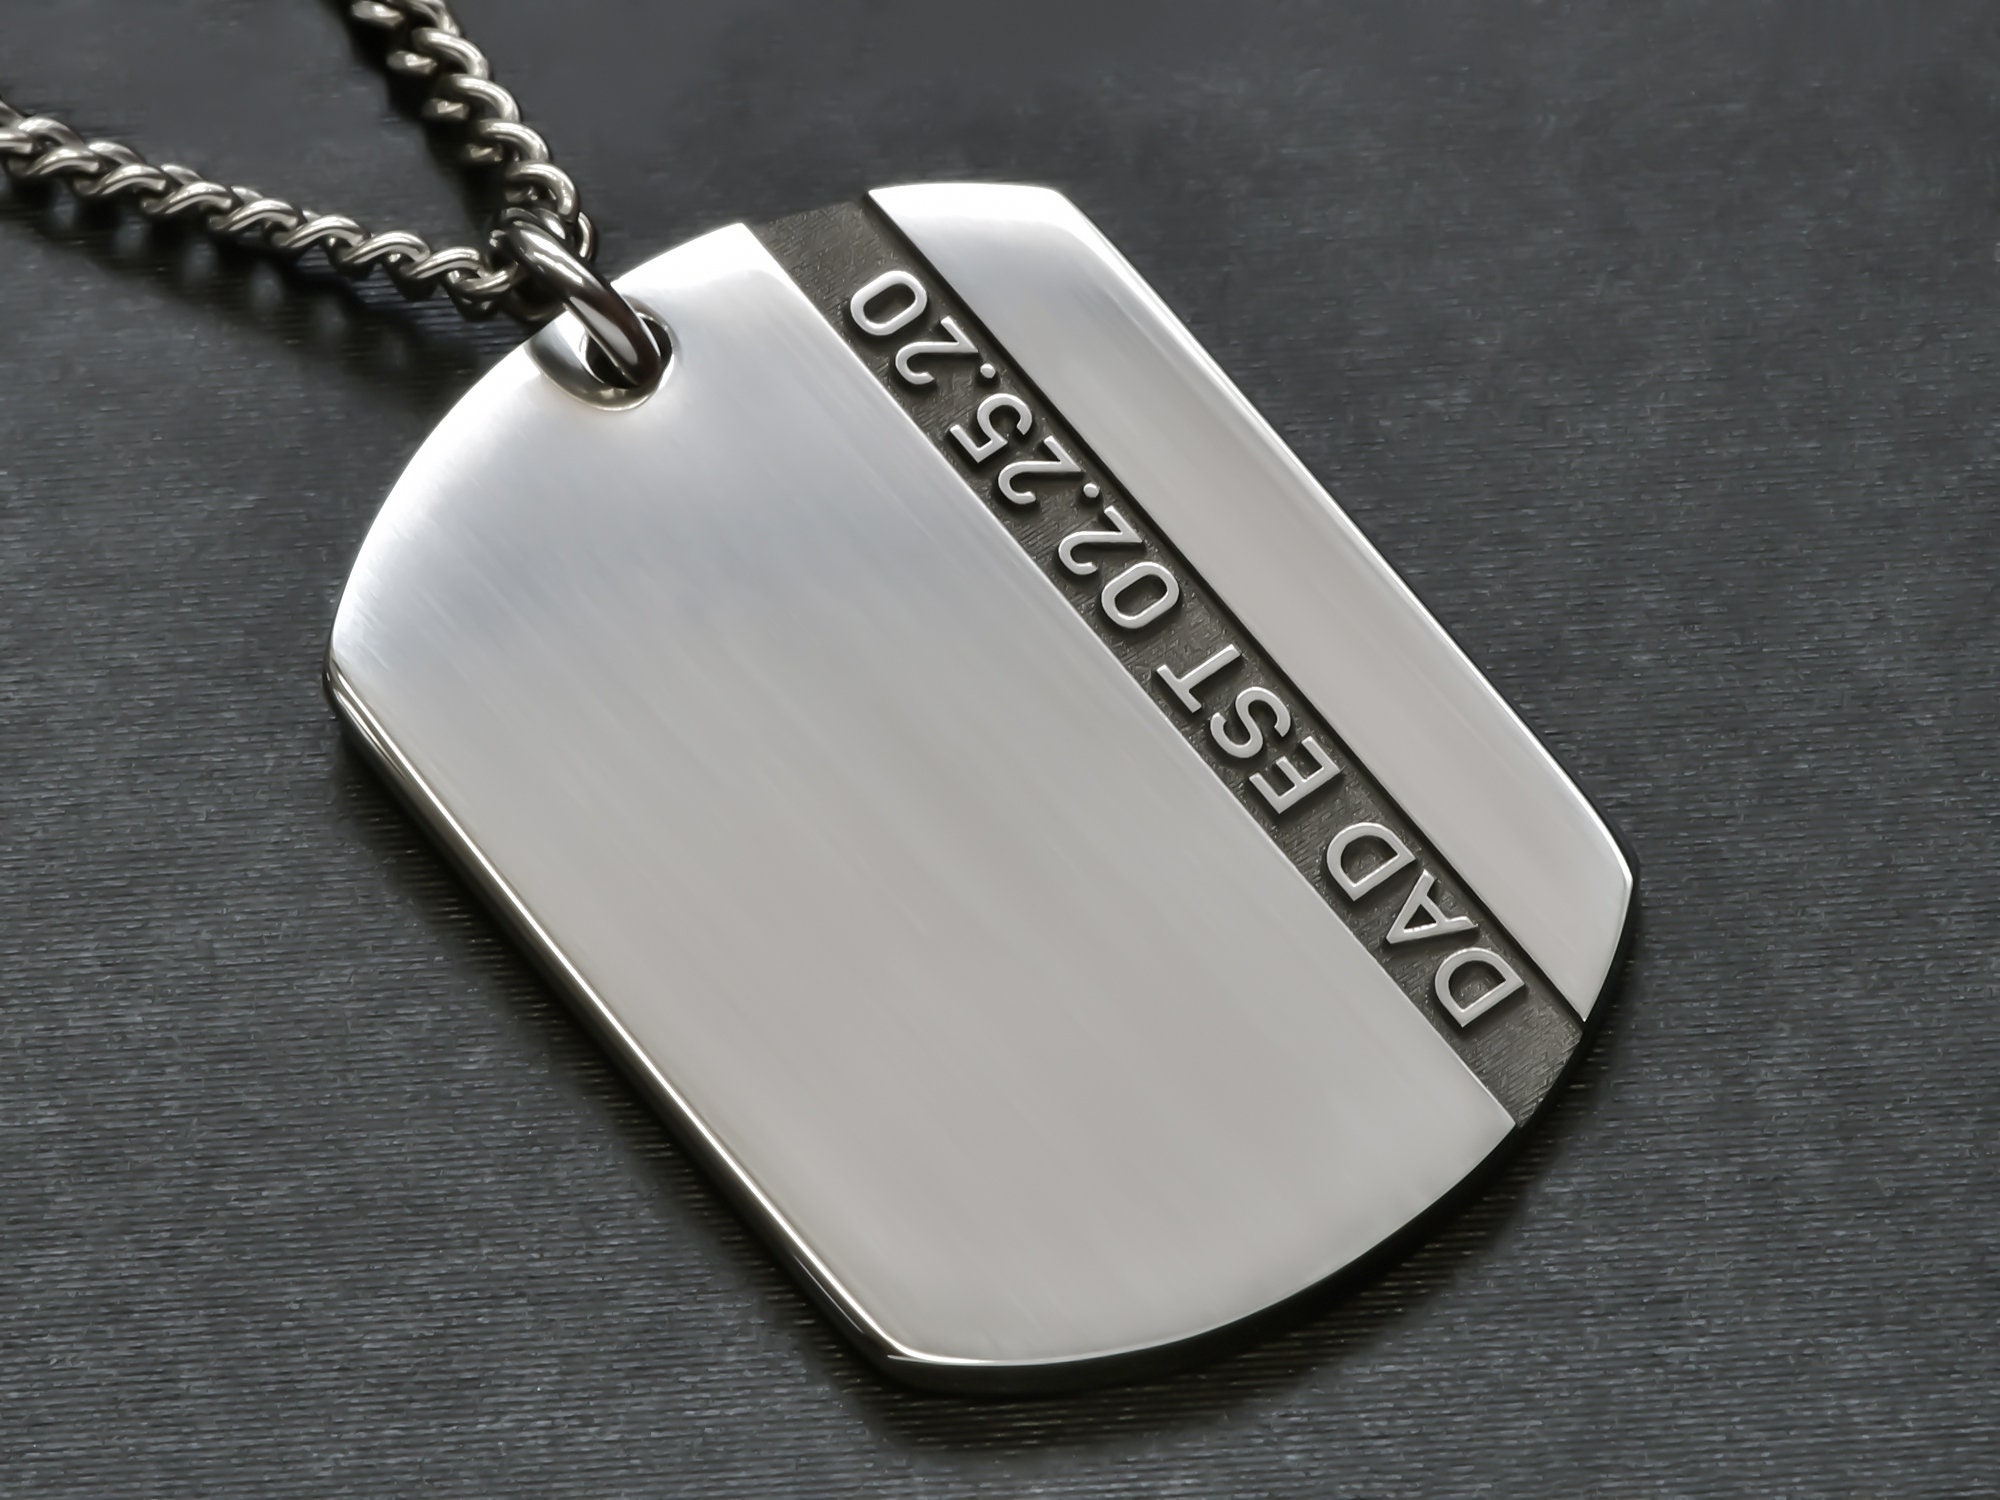 Jewelry Necklaces Necklace with Pendants Stainless Steel Brushed Black Leather Dogtag Necklace